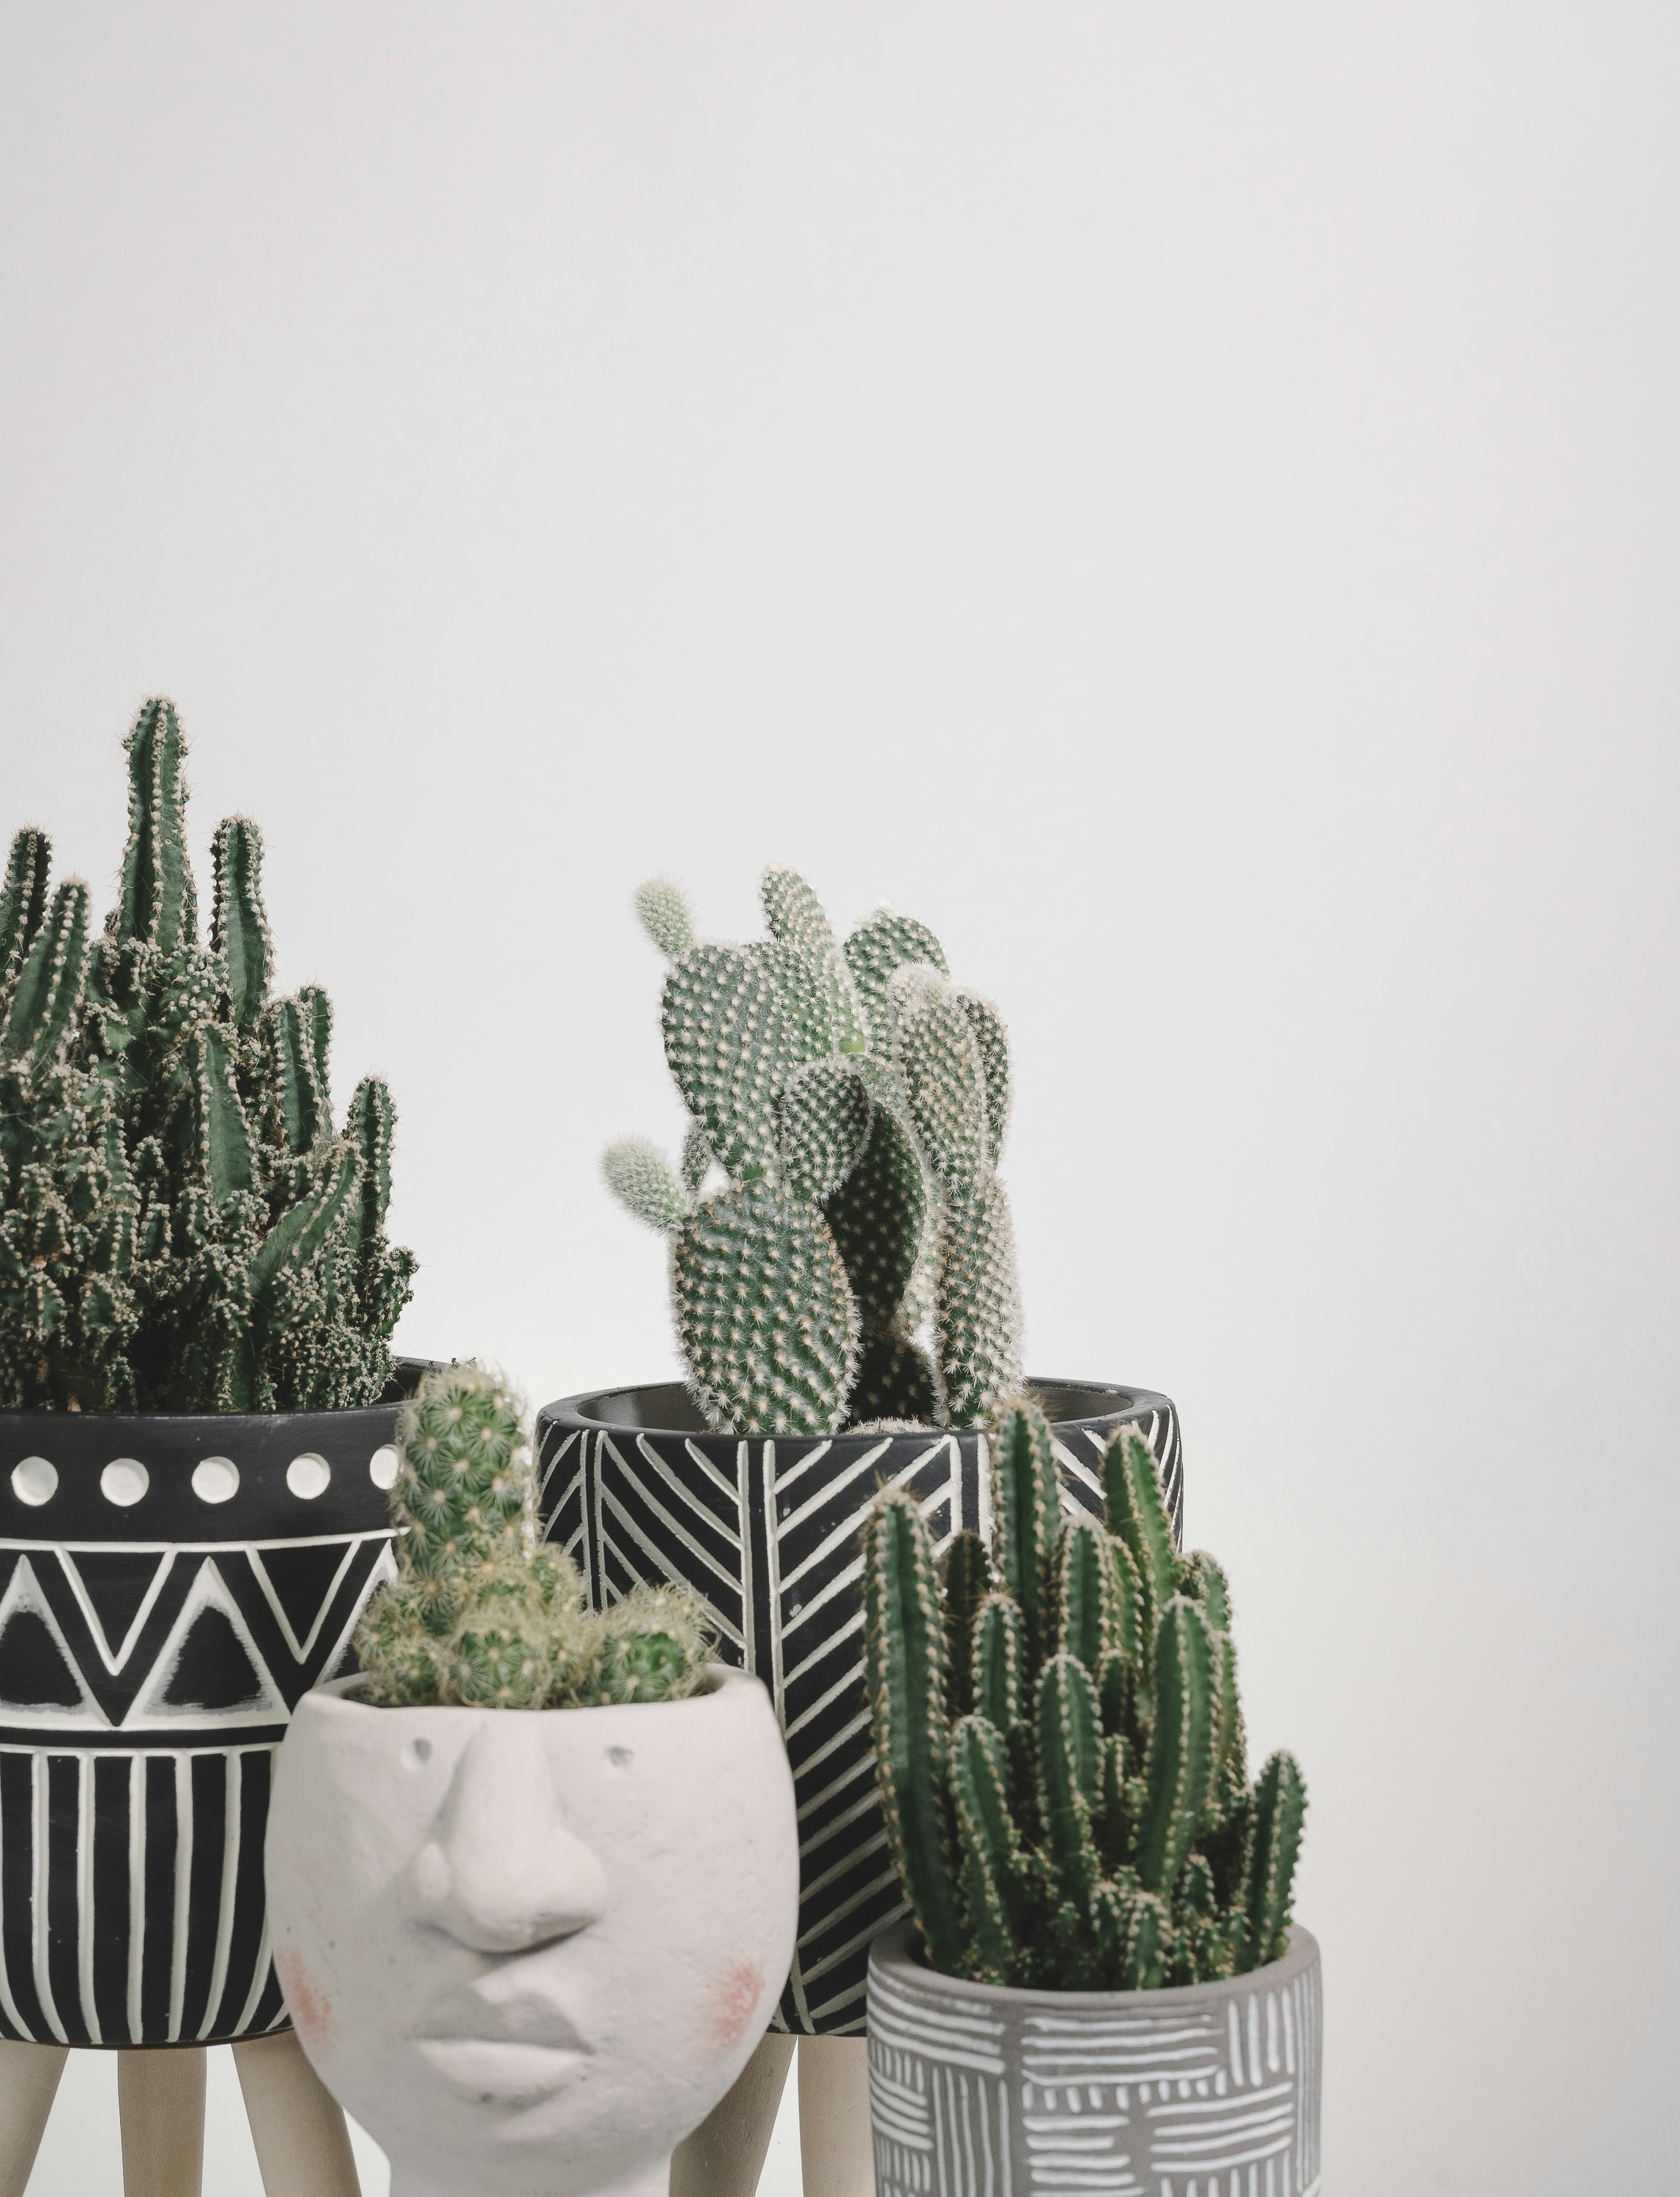 green cactus plants on white and black checkered table